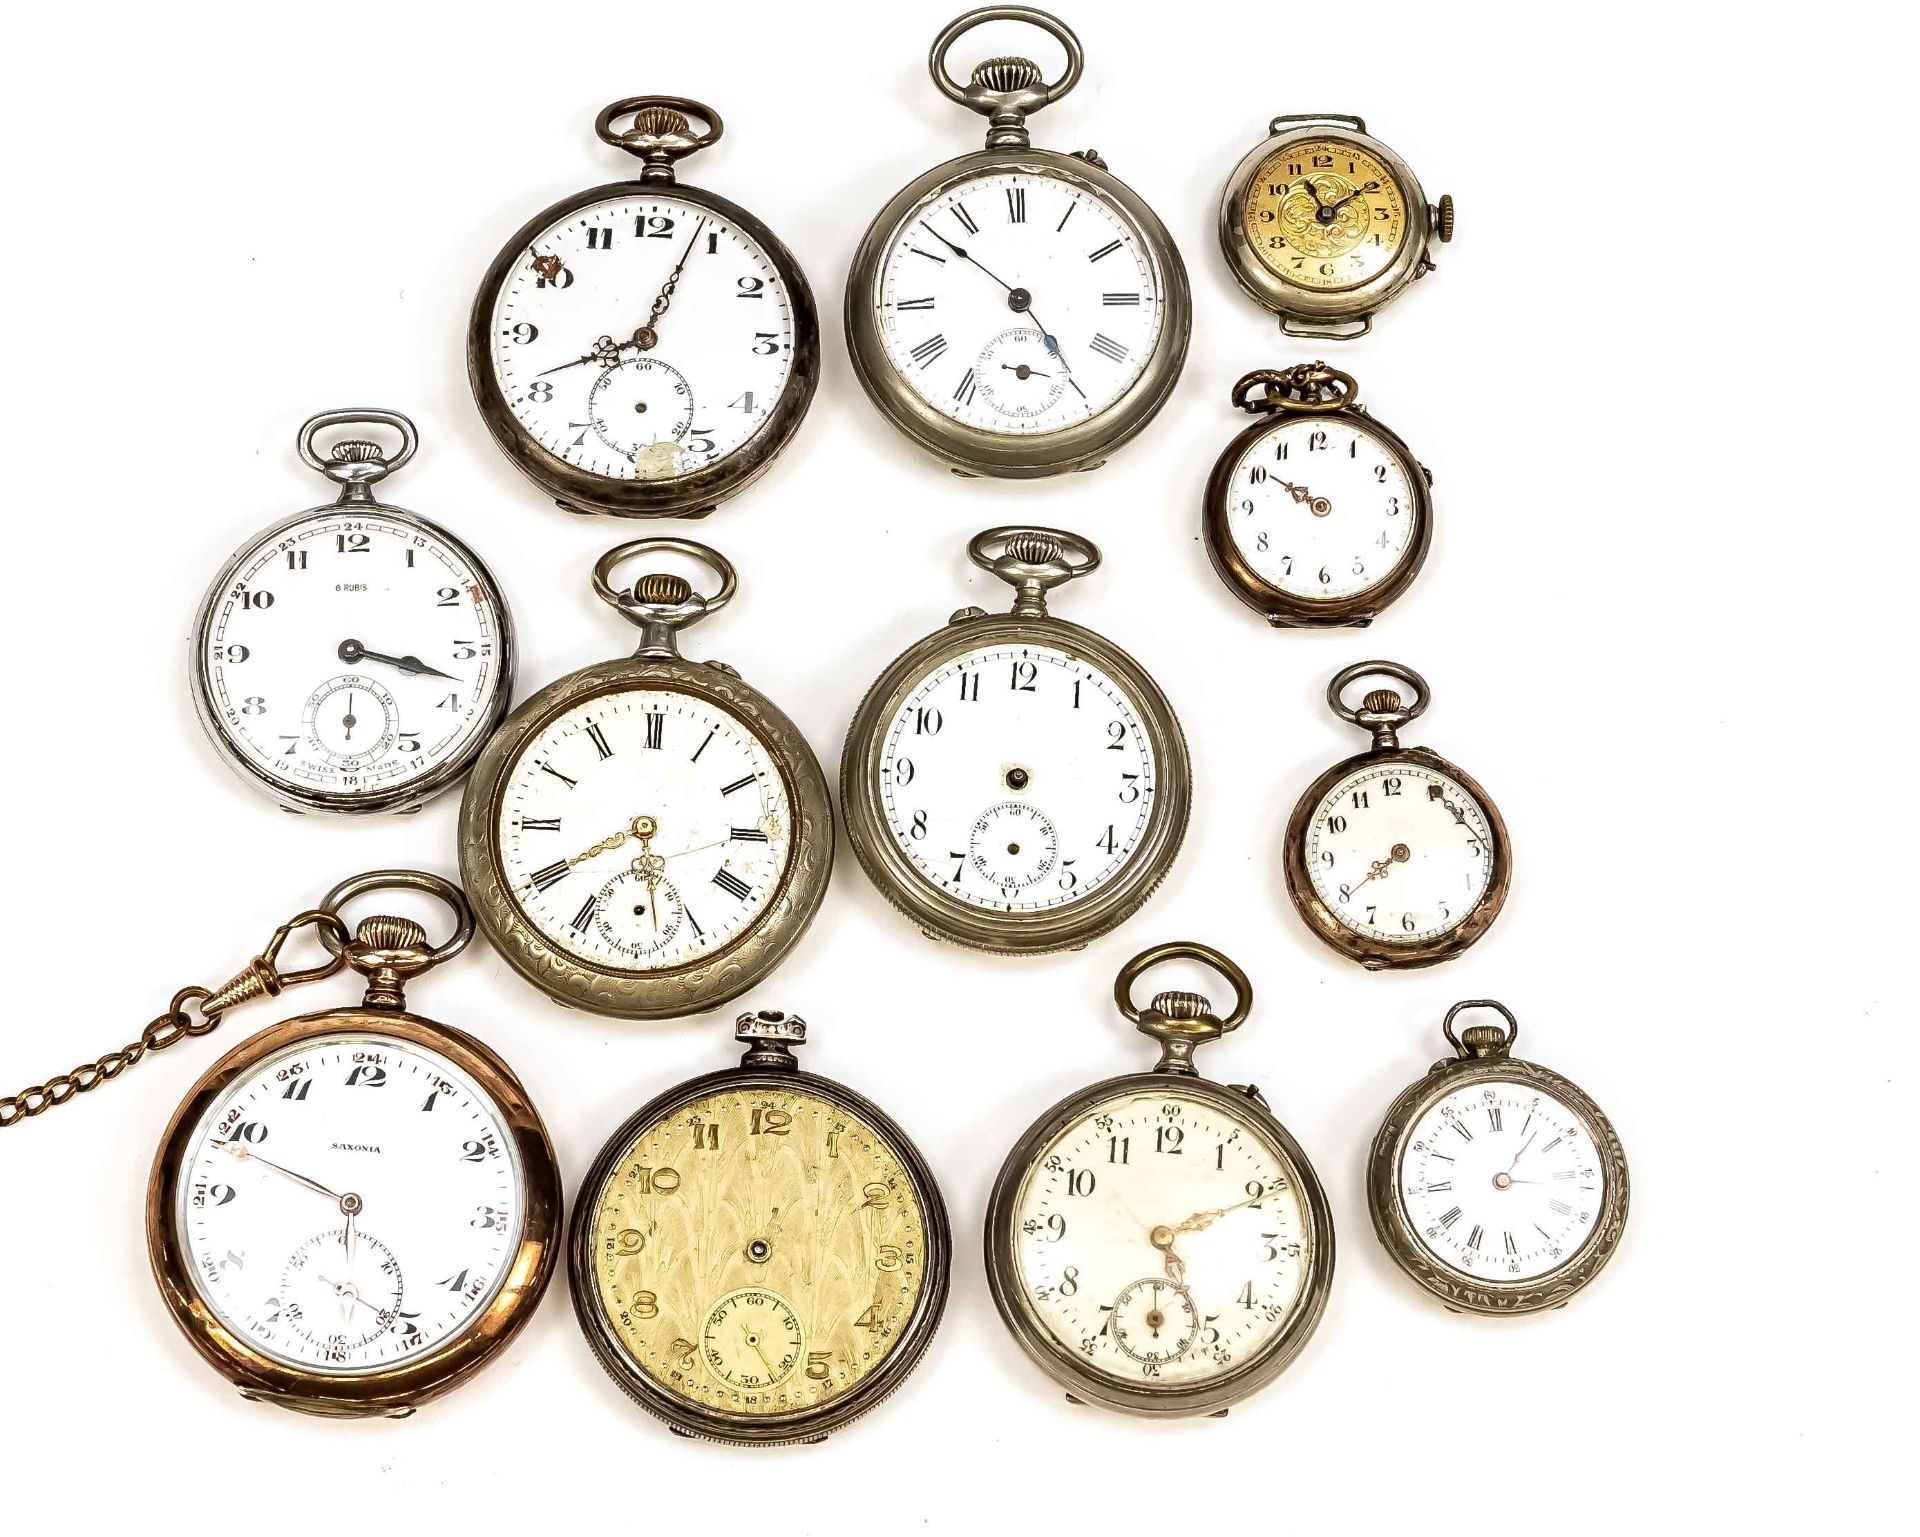 Convolute of 12 pocket watches, different brands, all as defective for repair or spare parts